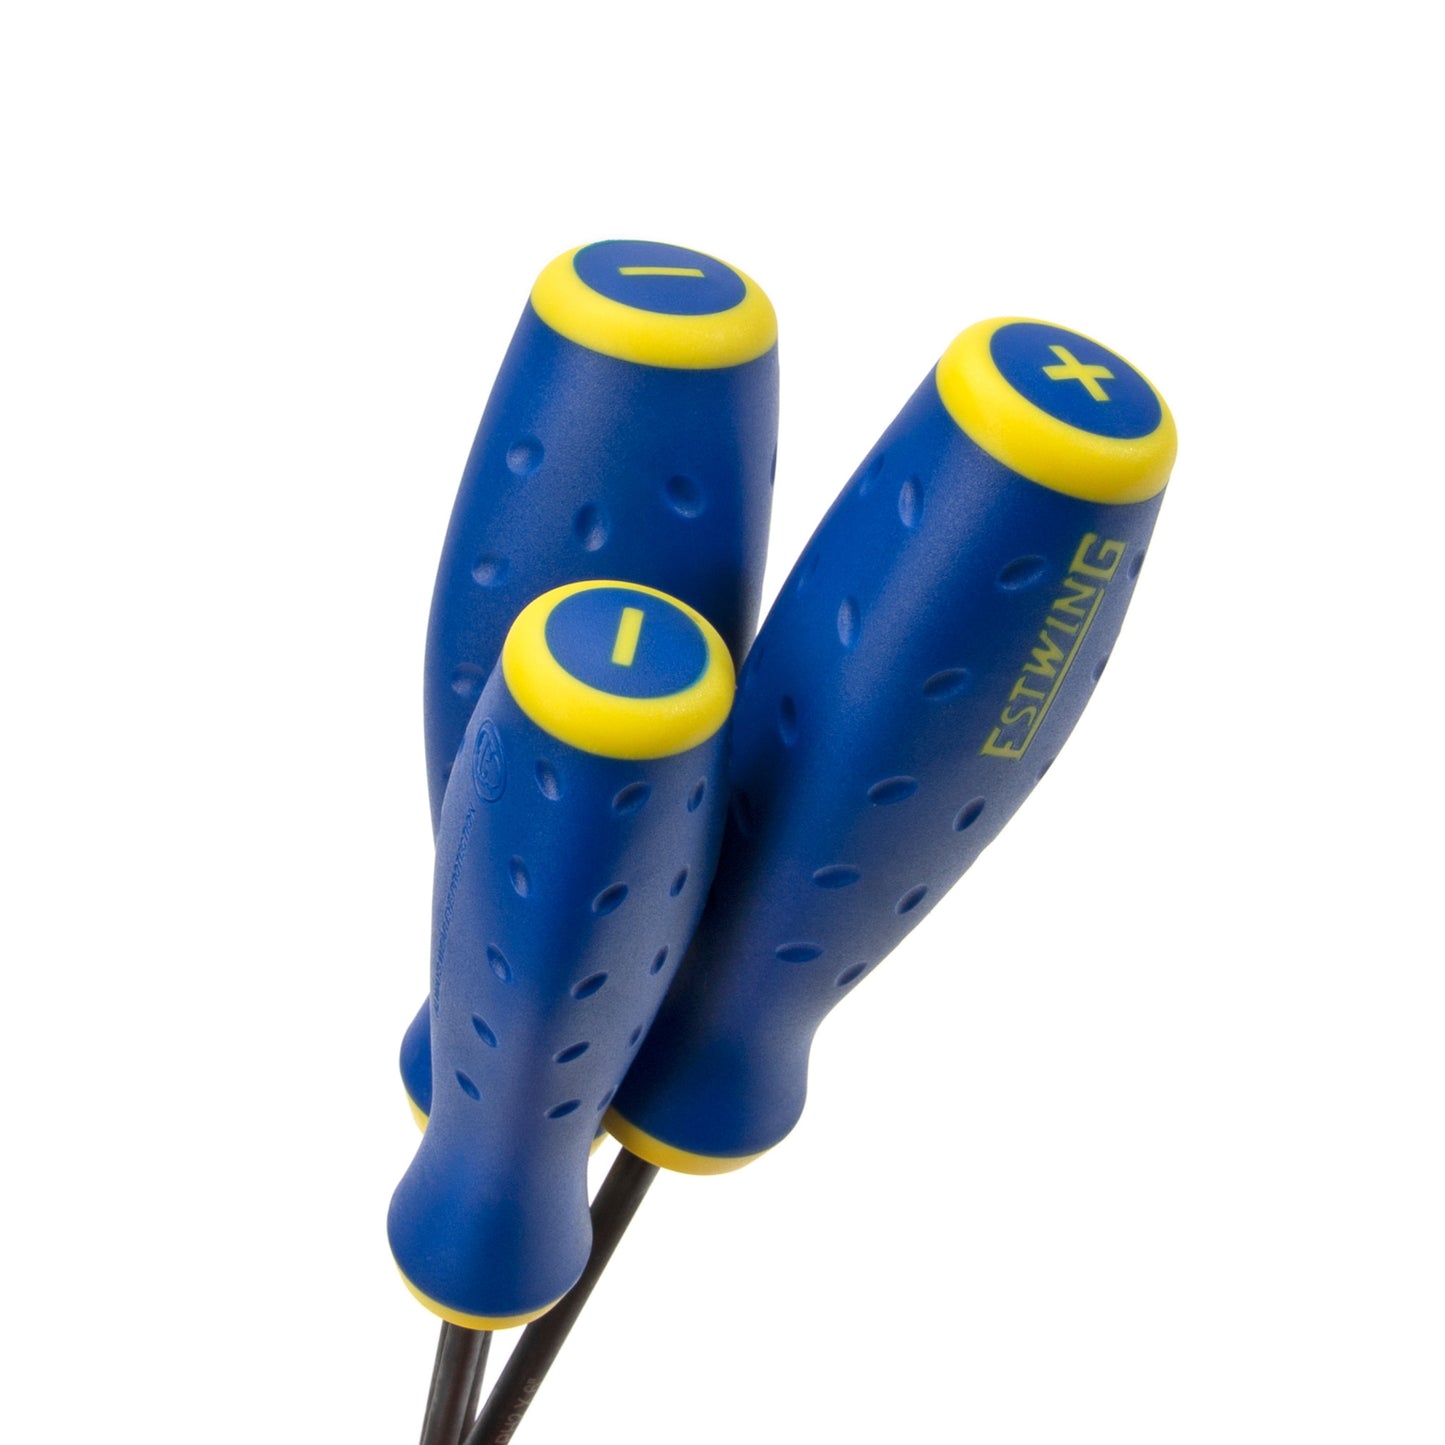 6-Piece Phillips and Slotted Magnetic Diamond Tip Screwdriver Set